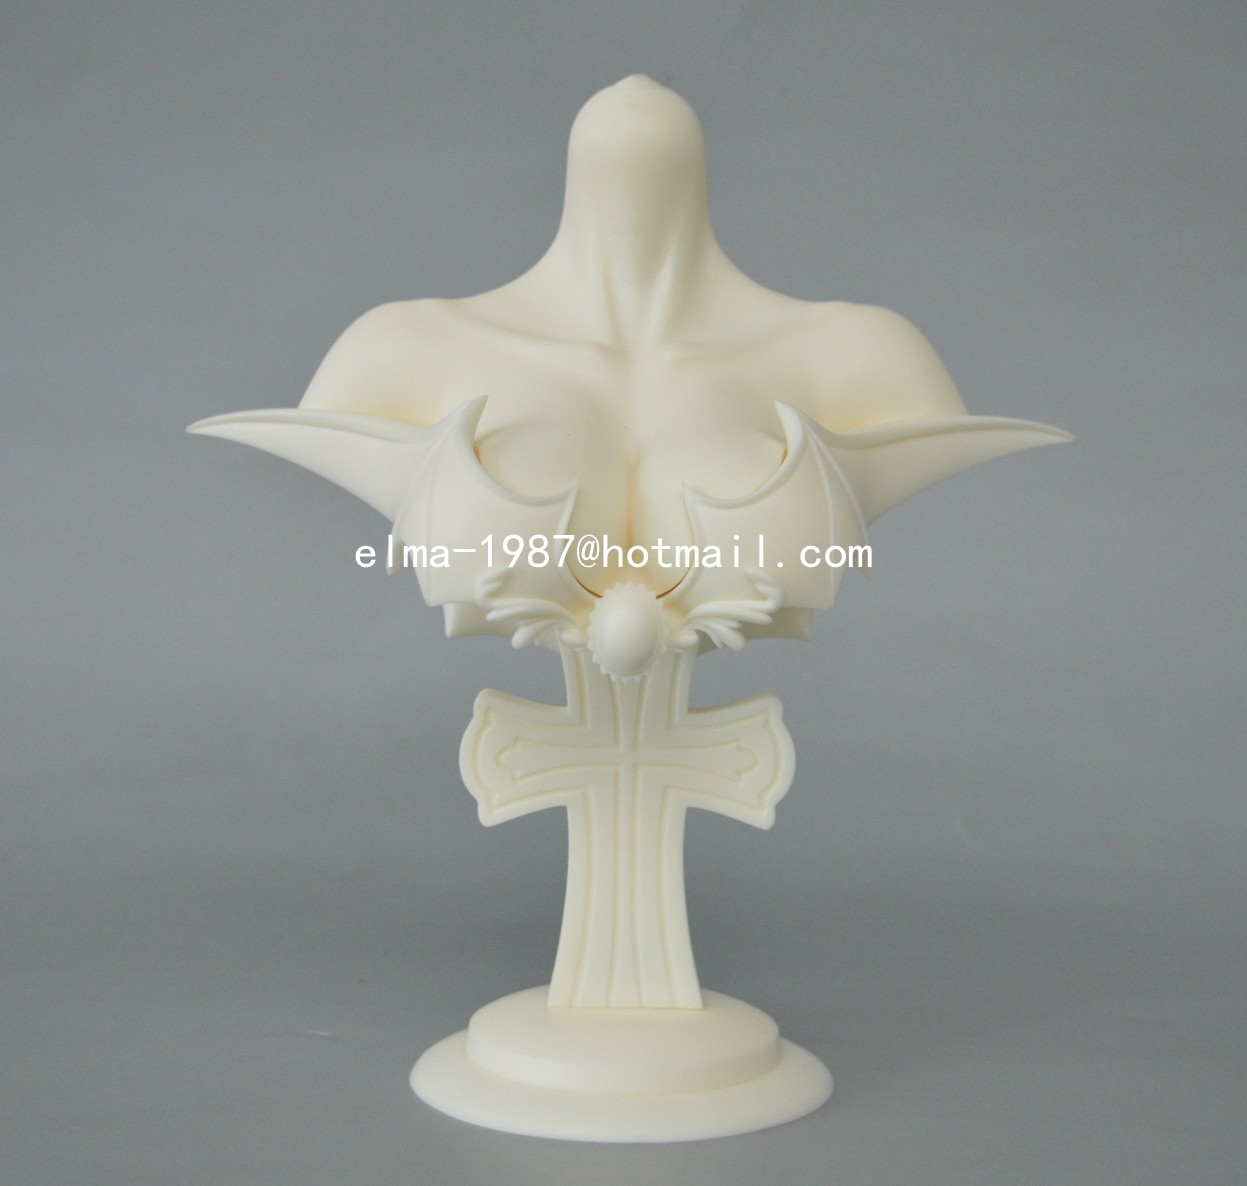 Bust part for 1/3 size BJD